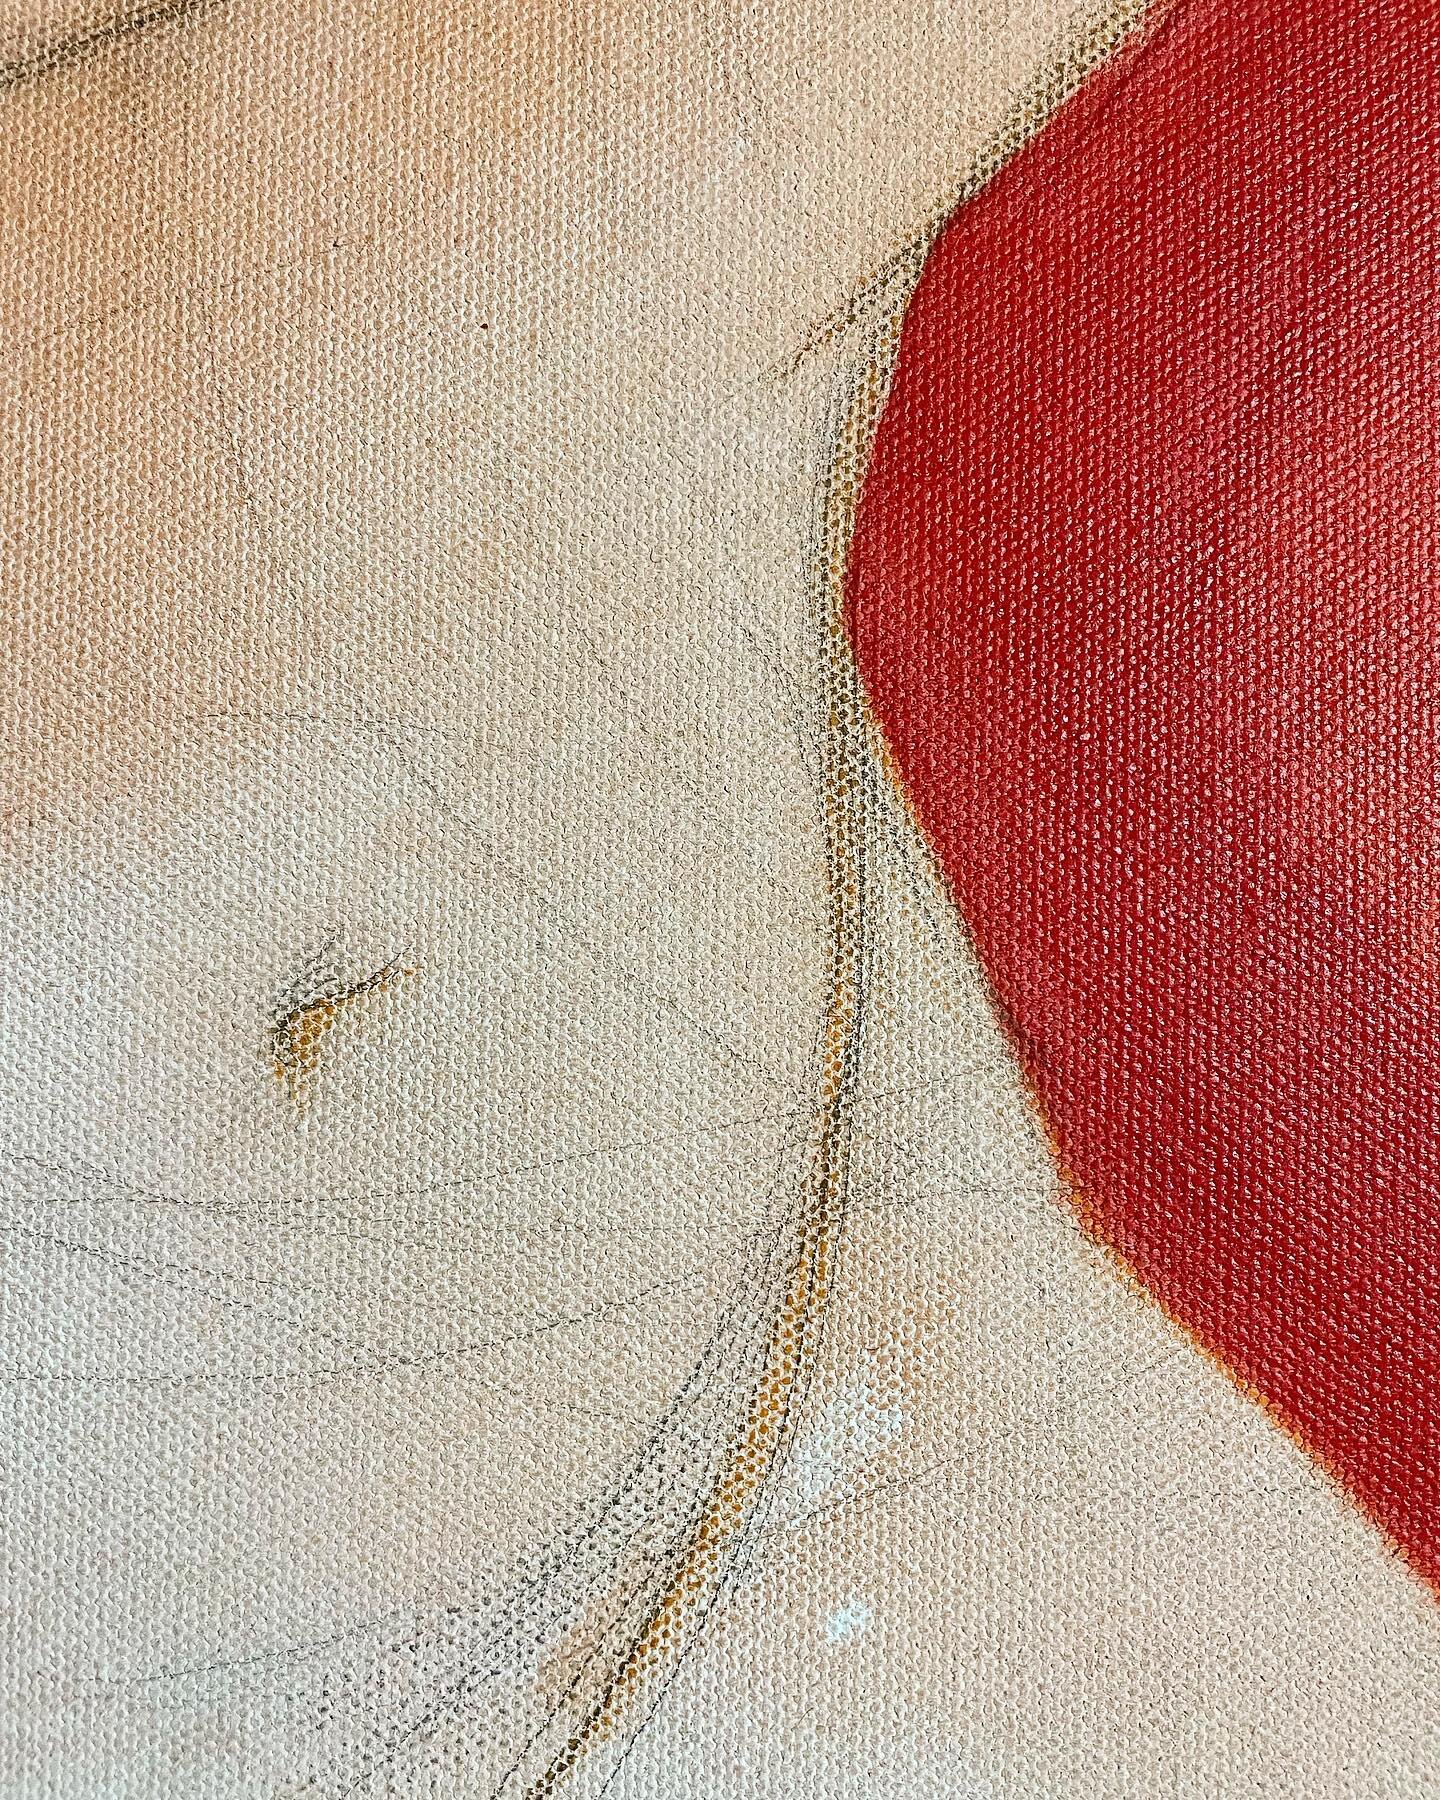 New year, new painting in progress. Hope your day is going in a good direction. 
.
.
.
#pioneertown #pioneertownart #workinprogress #figuredrawing #curves #acryliconcanvas #newartforthenewyear